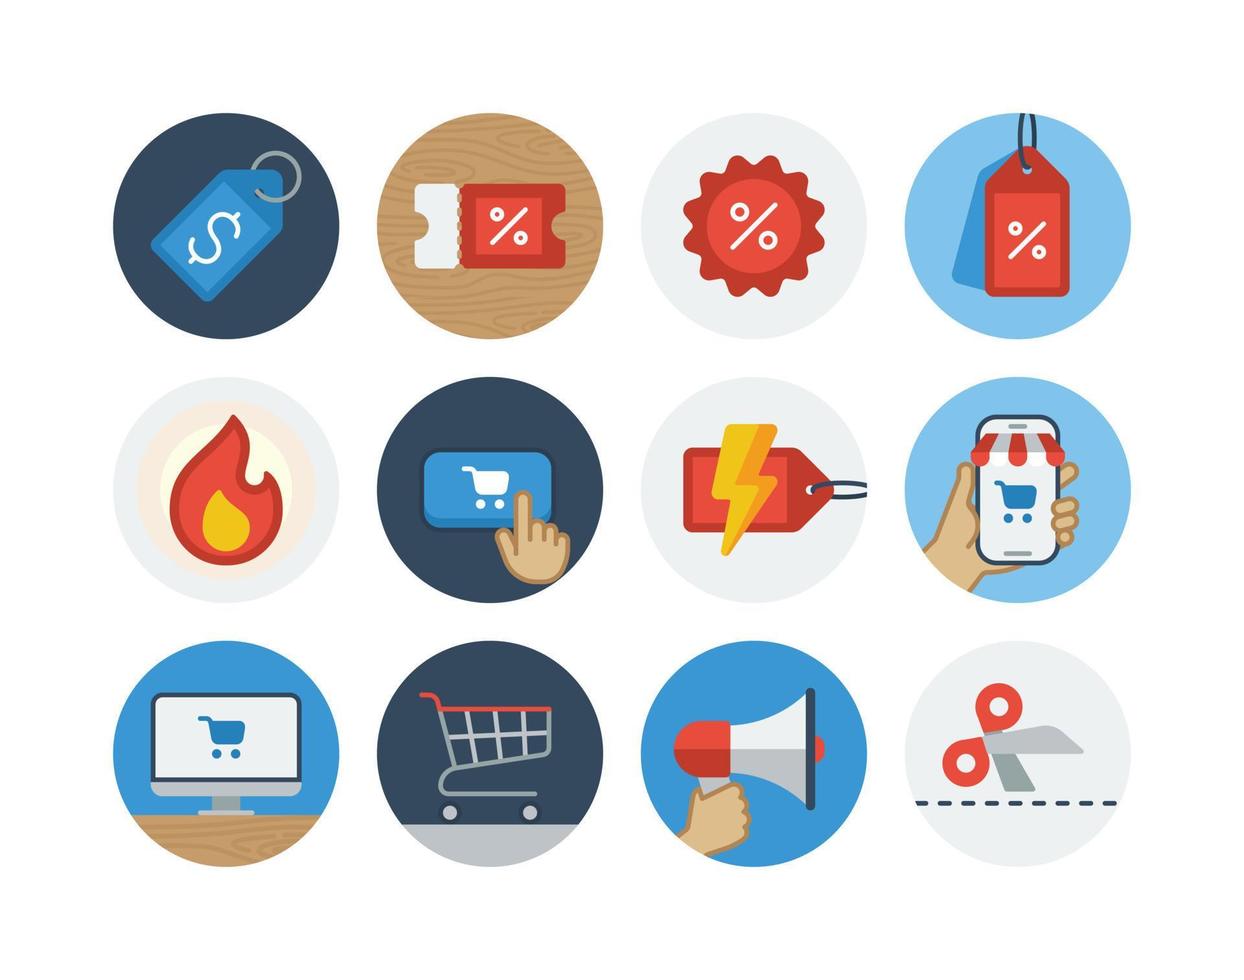 Black friday and cyber monday flat circle icon set with sale related icons vector